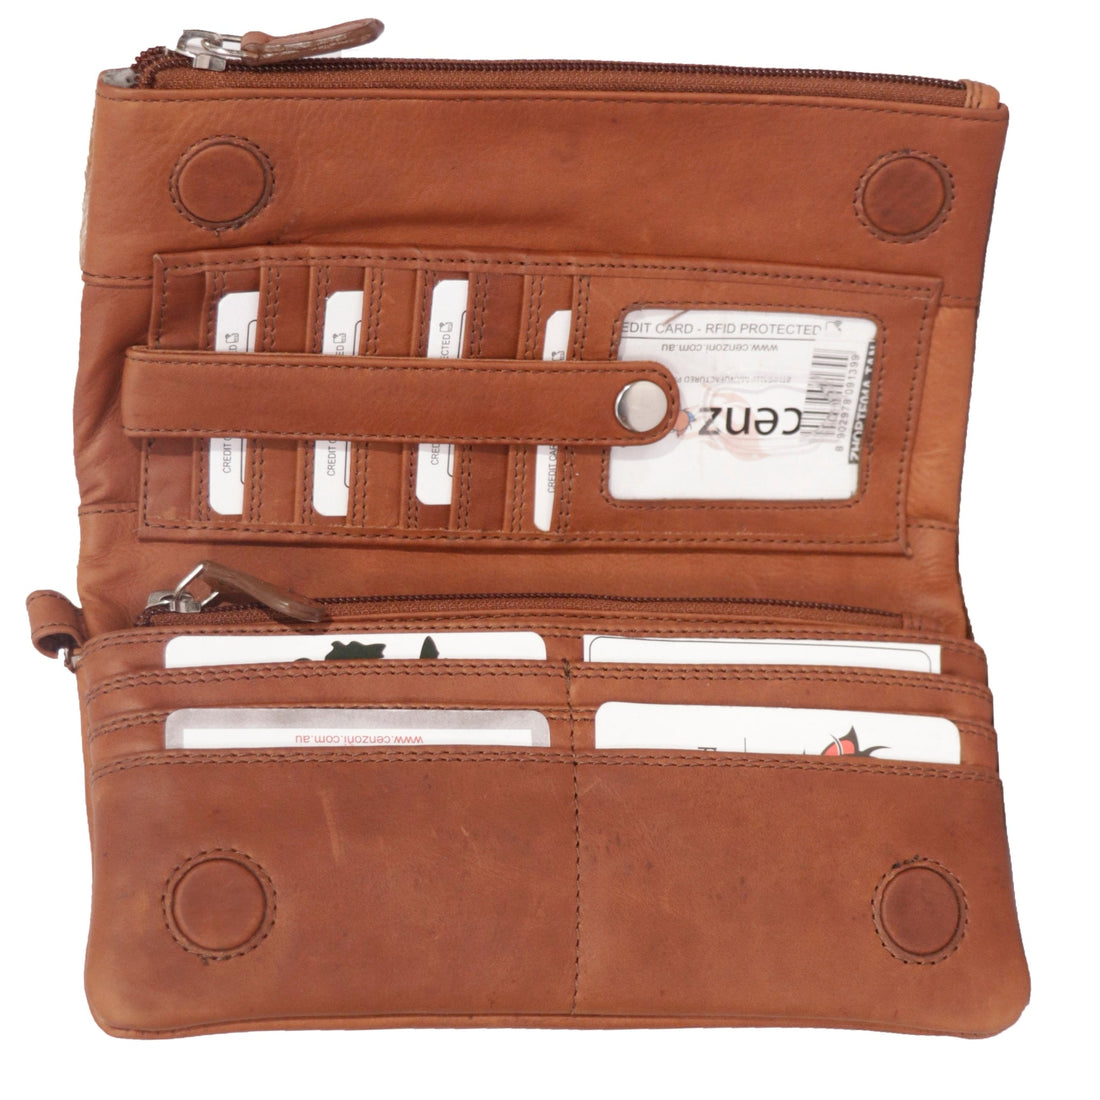 Flap Over Wallet ZHOPTF04A